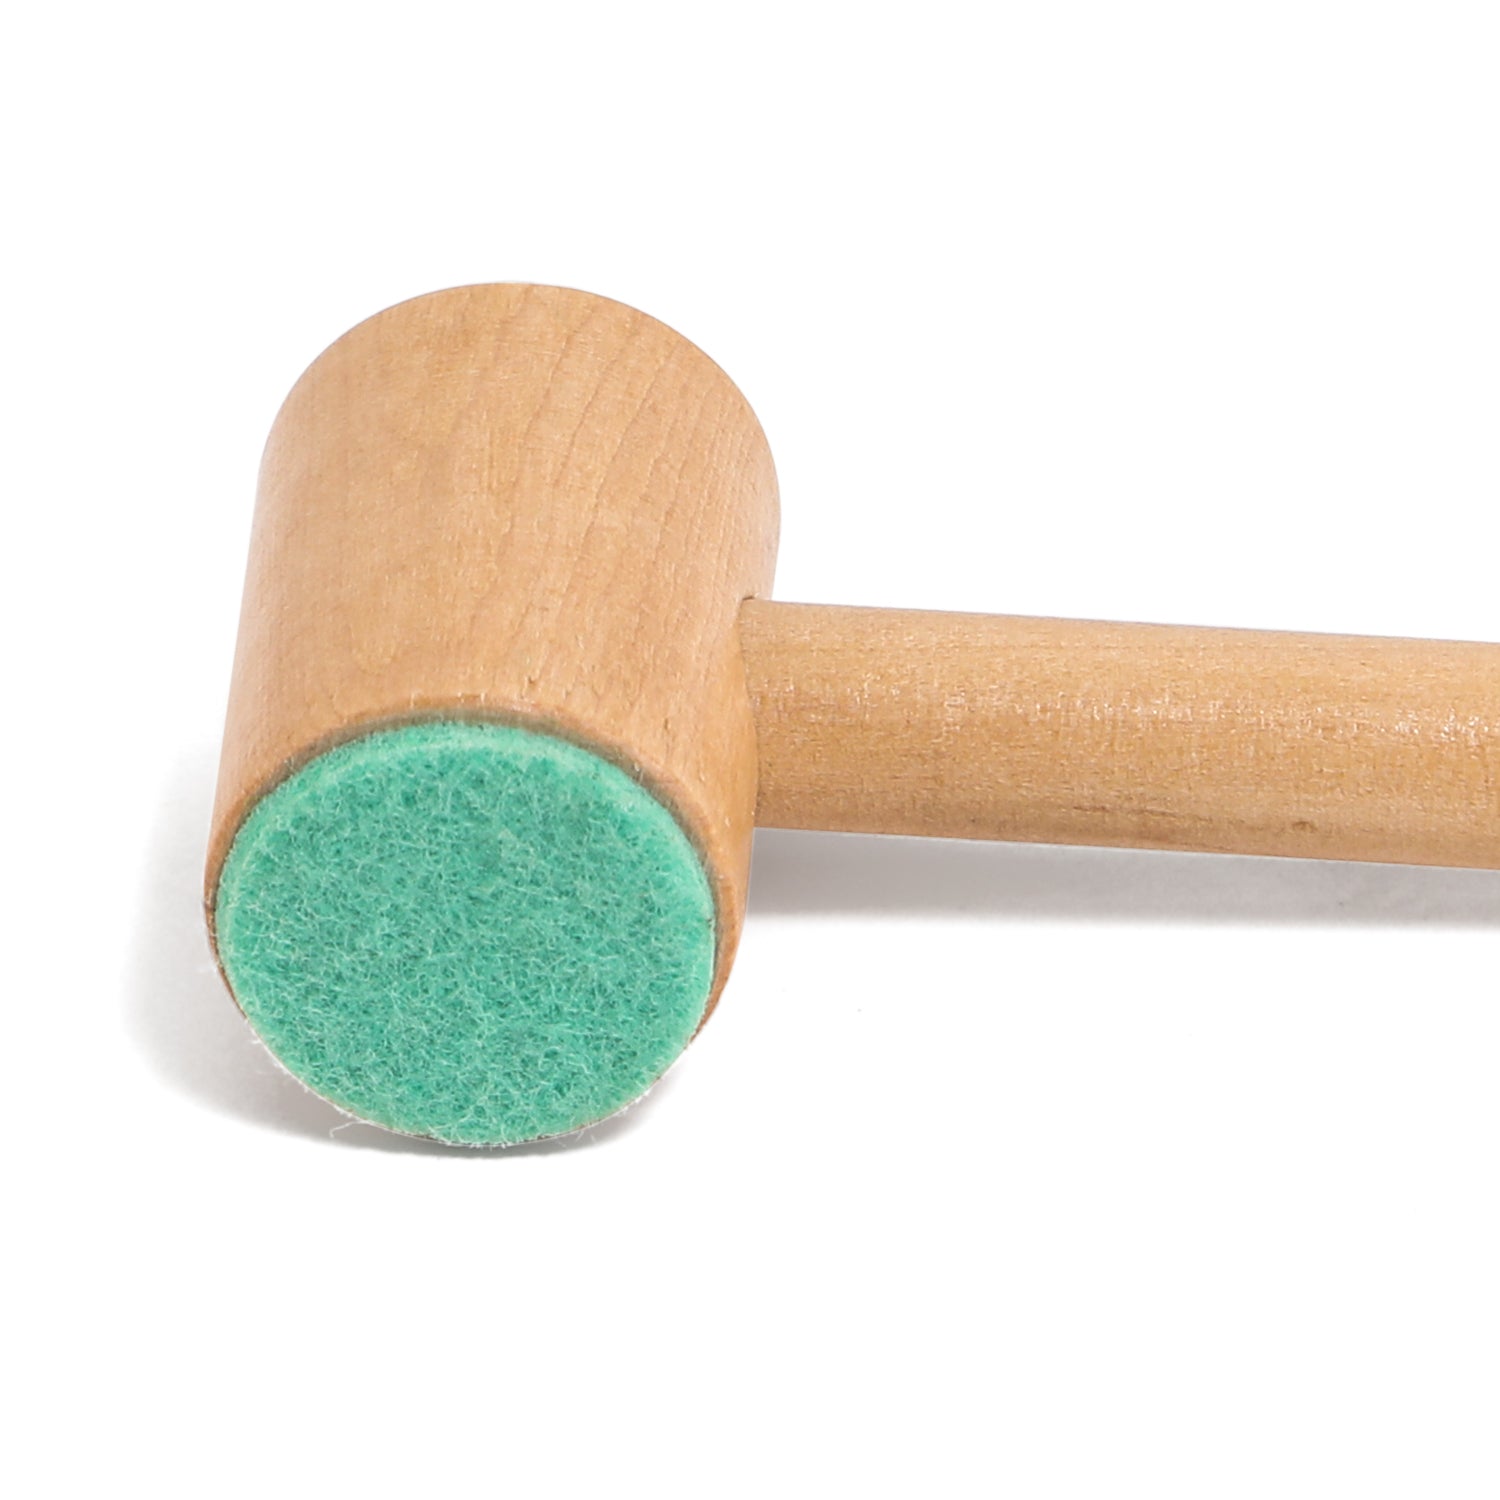 The surface of the hammer's striking surface is covered with noise-reducing felt.